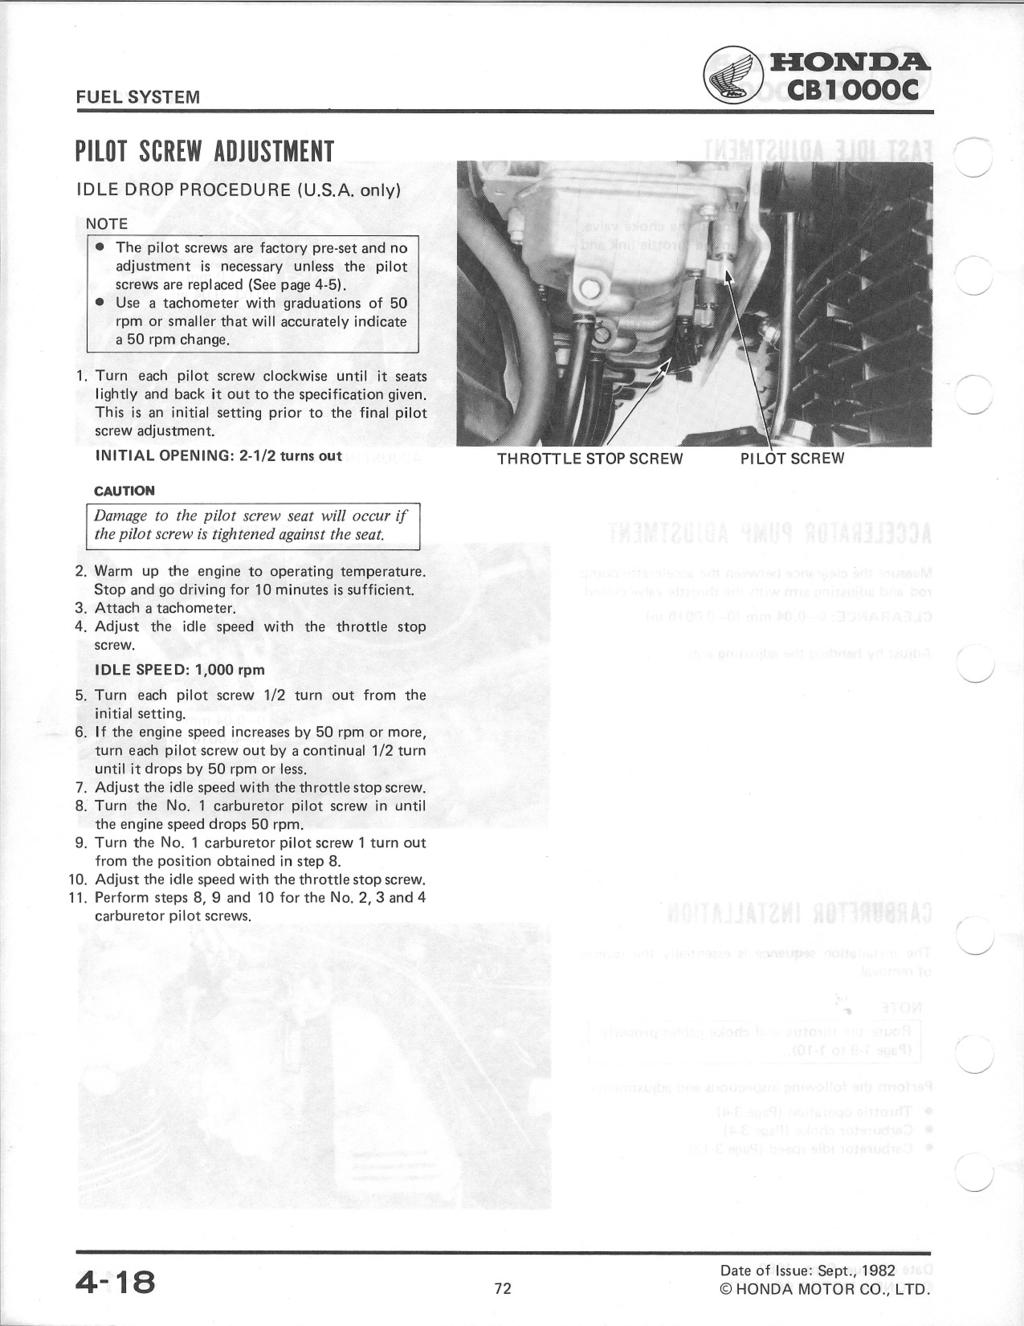 FUEL SYSTEM ~HOND.A~ CB1000C PILDT SCREW ADJUSTMENT IDLE DROP PROCEDURE (U.S.A. only) r--- The pilot screws are factory pre-set and no adjustment is necessary unless the pilot screws are replaced (See page 4-5).